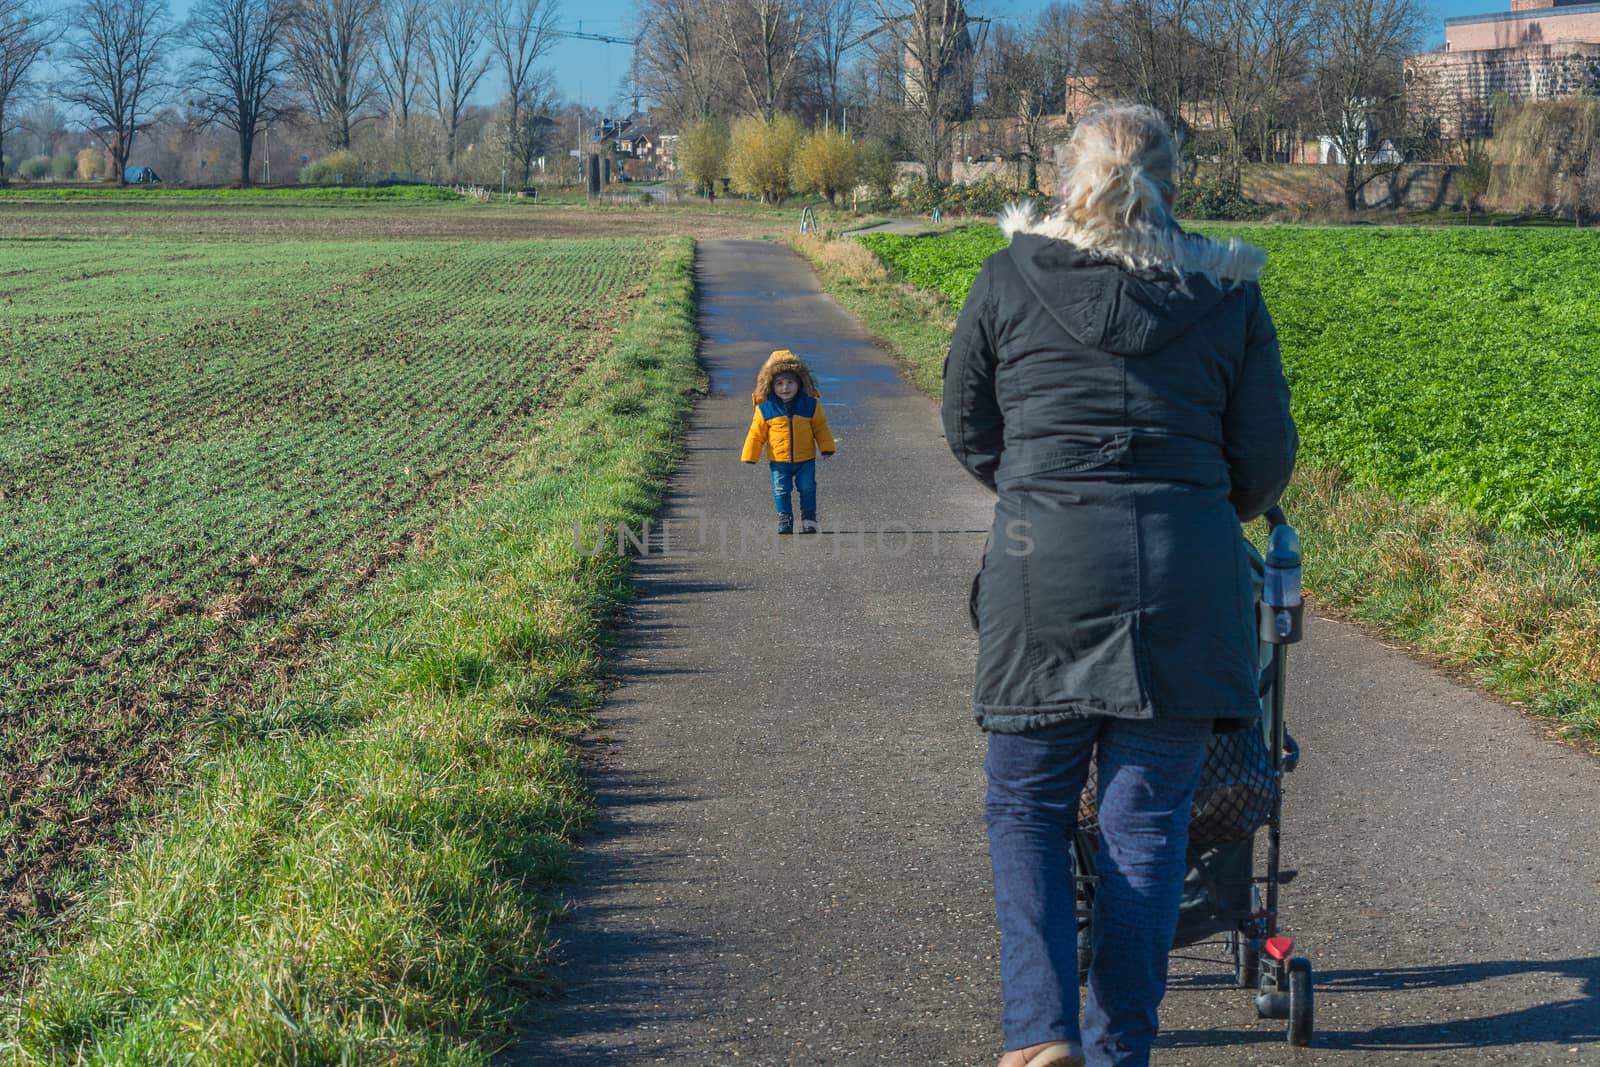 Grandmother and grandchild go for a walk by JFsPic